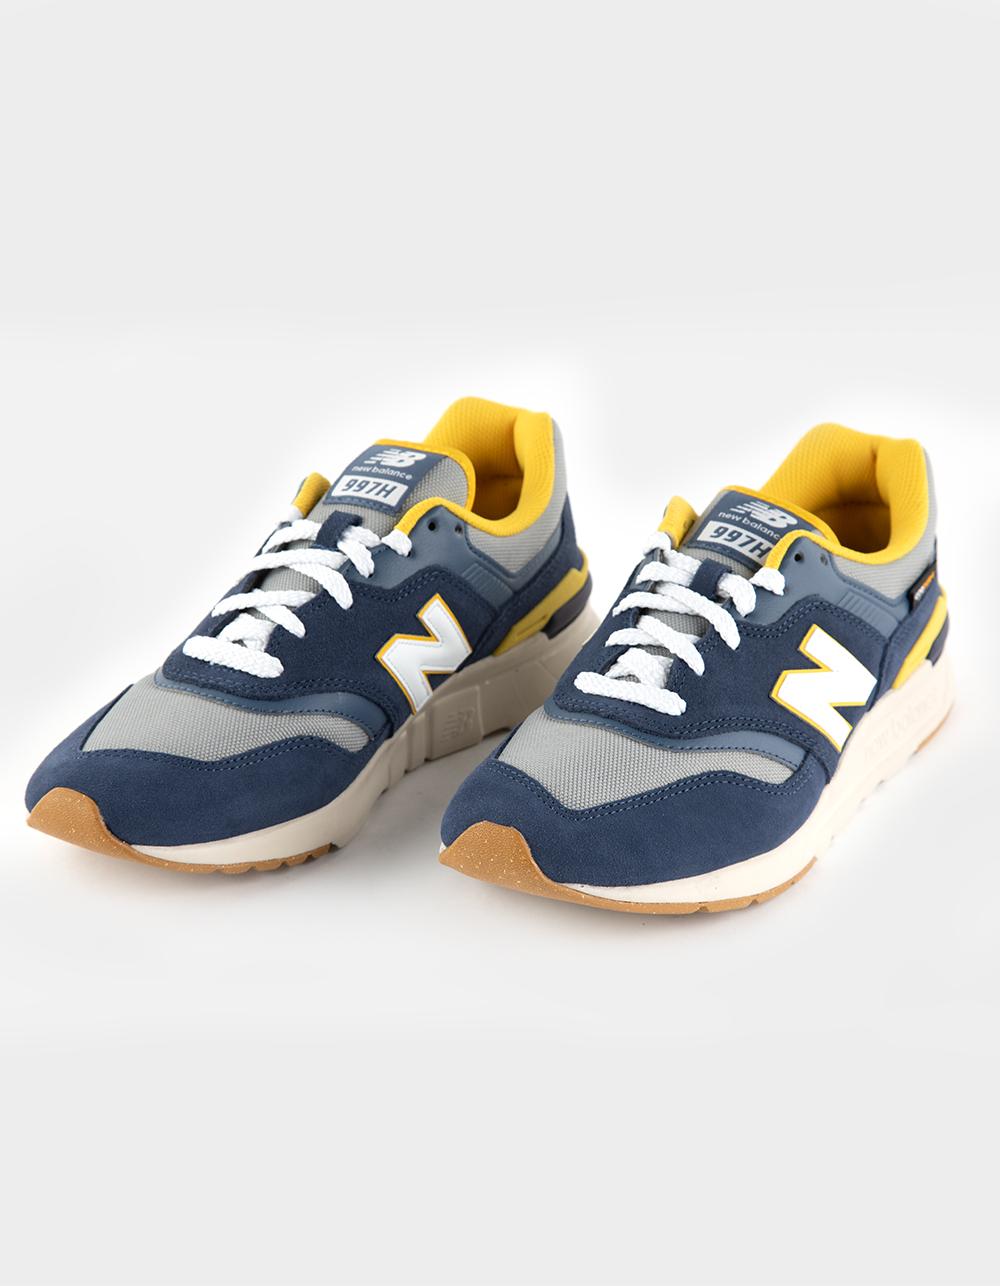 NEW BALANCE 997H Mens Shoes - NAVY/YELLOW | Tillys